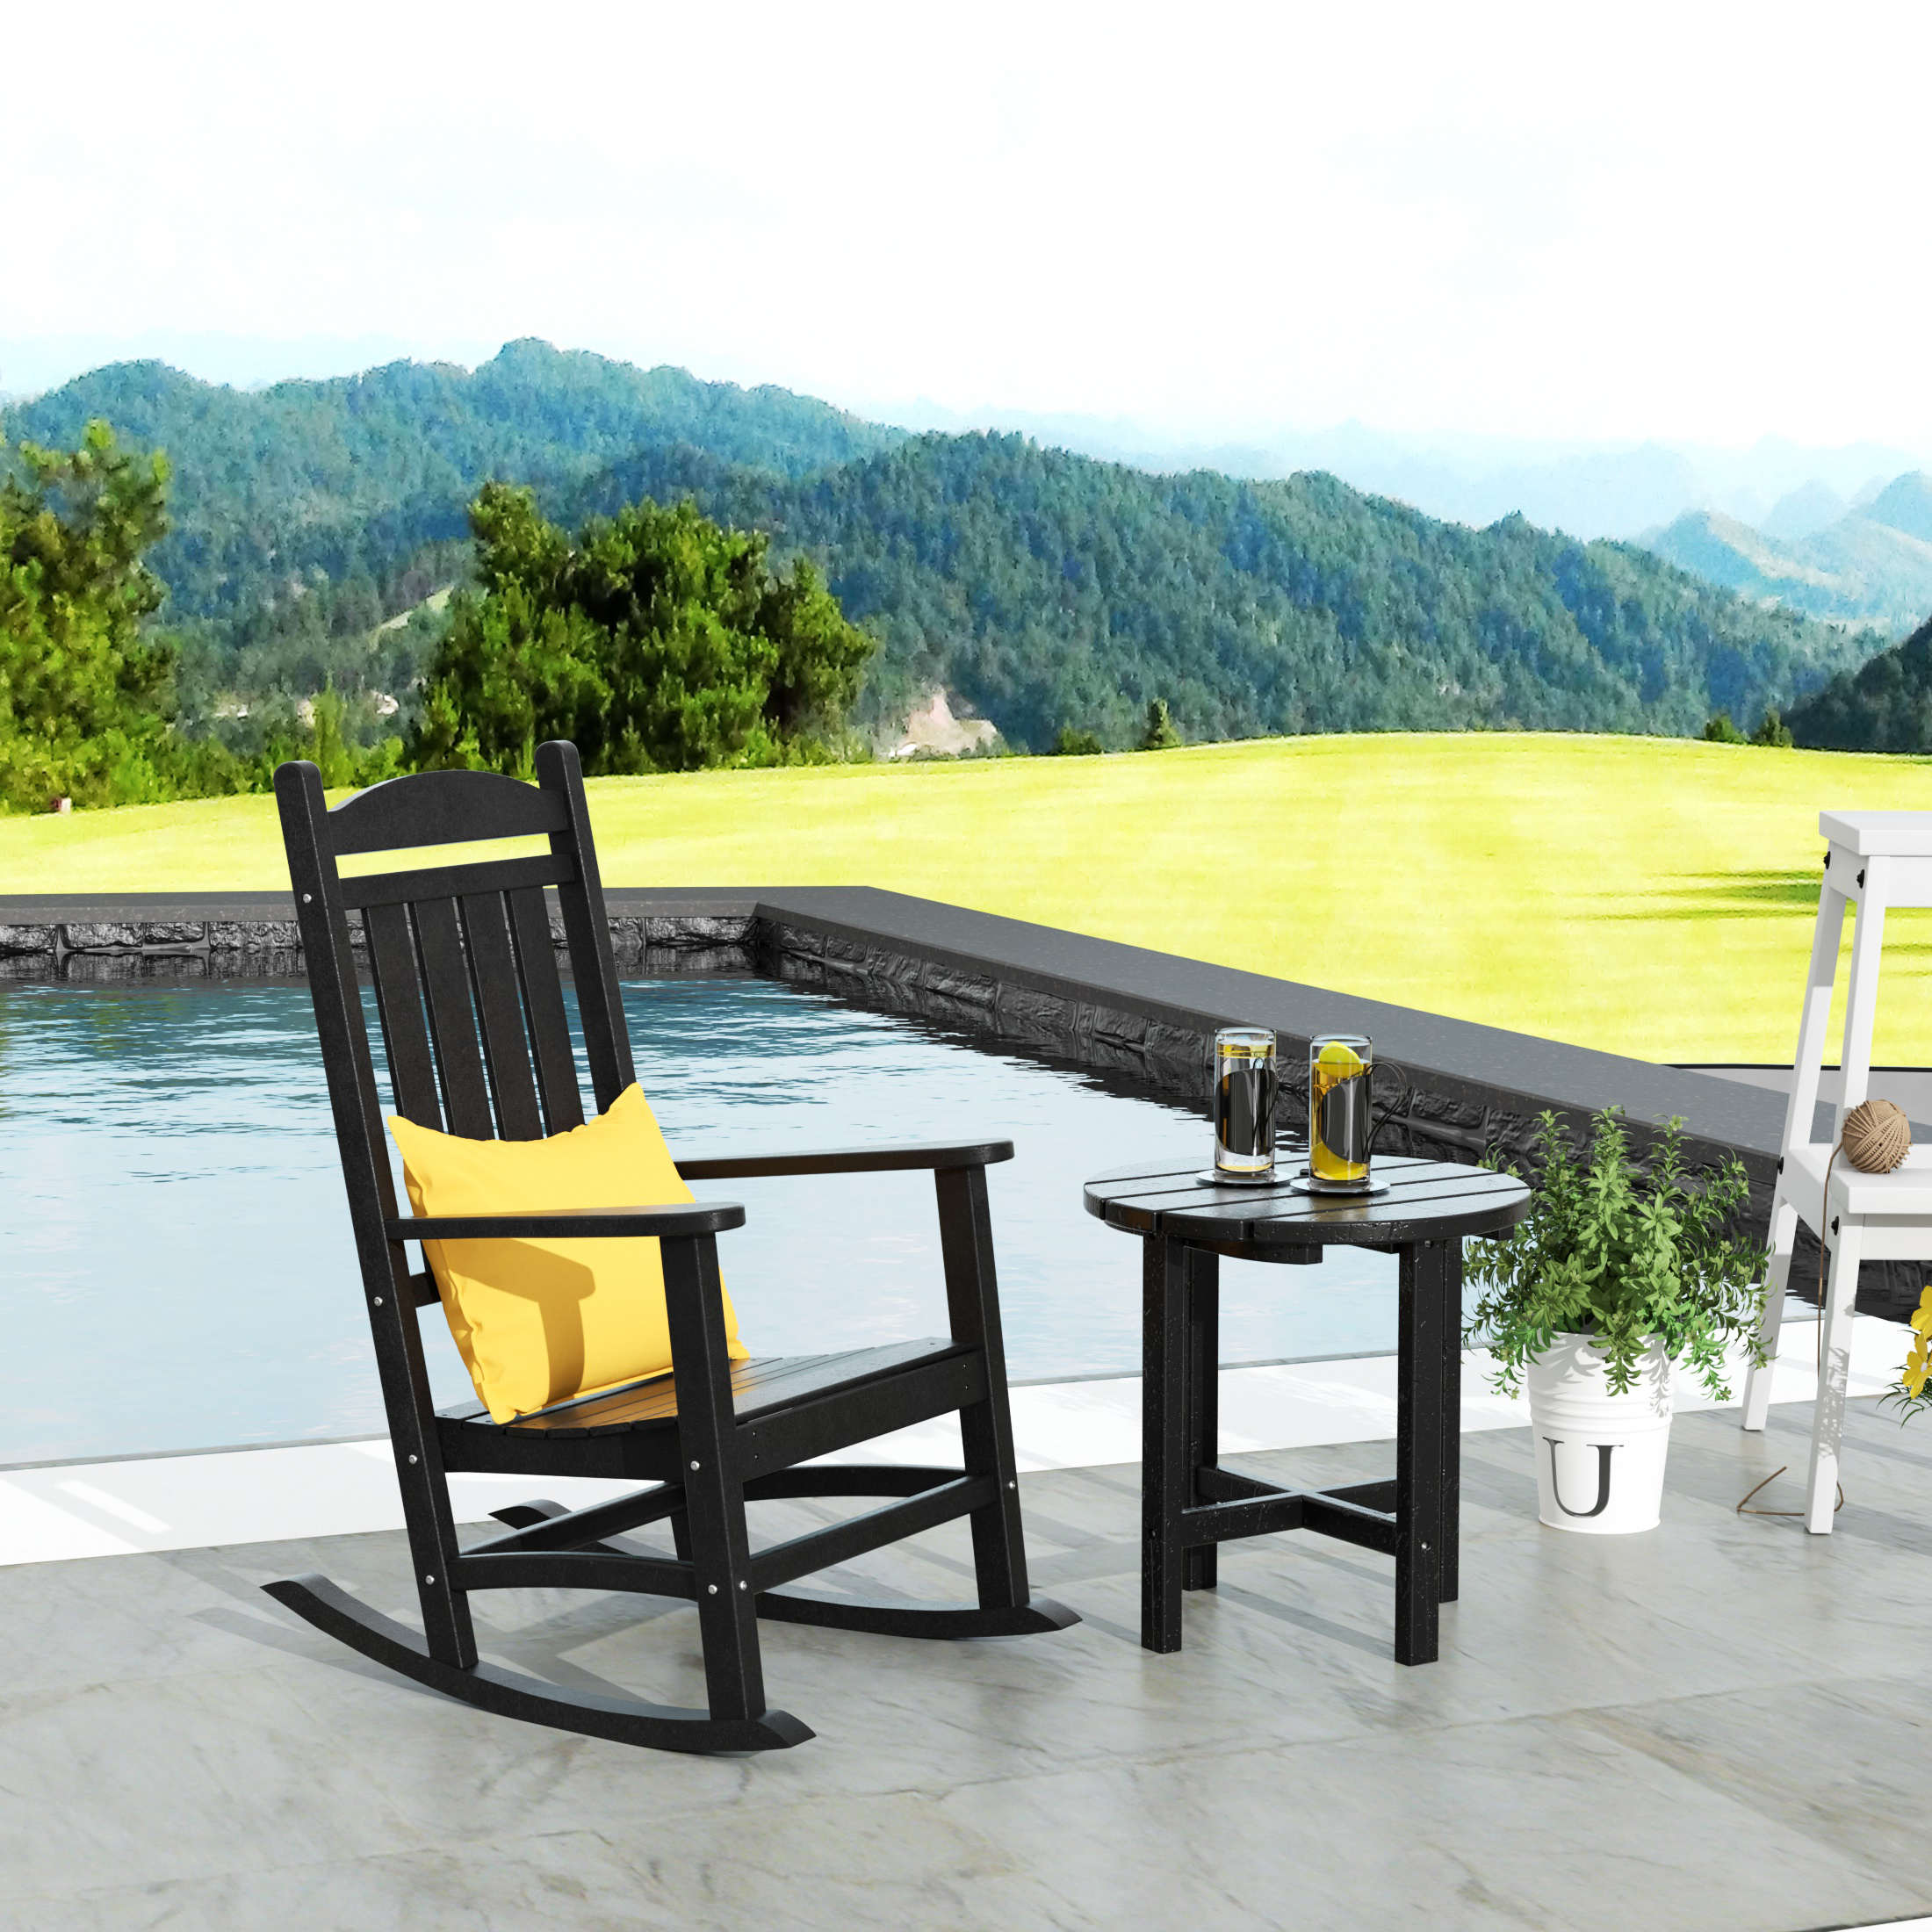 WestinTrends 2-Pieces Set Outdoor Rocking Chair w/ Round Side Table Included, Black - image 1 of 7